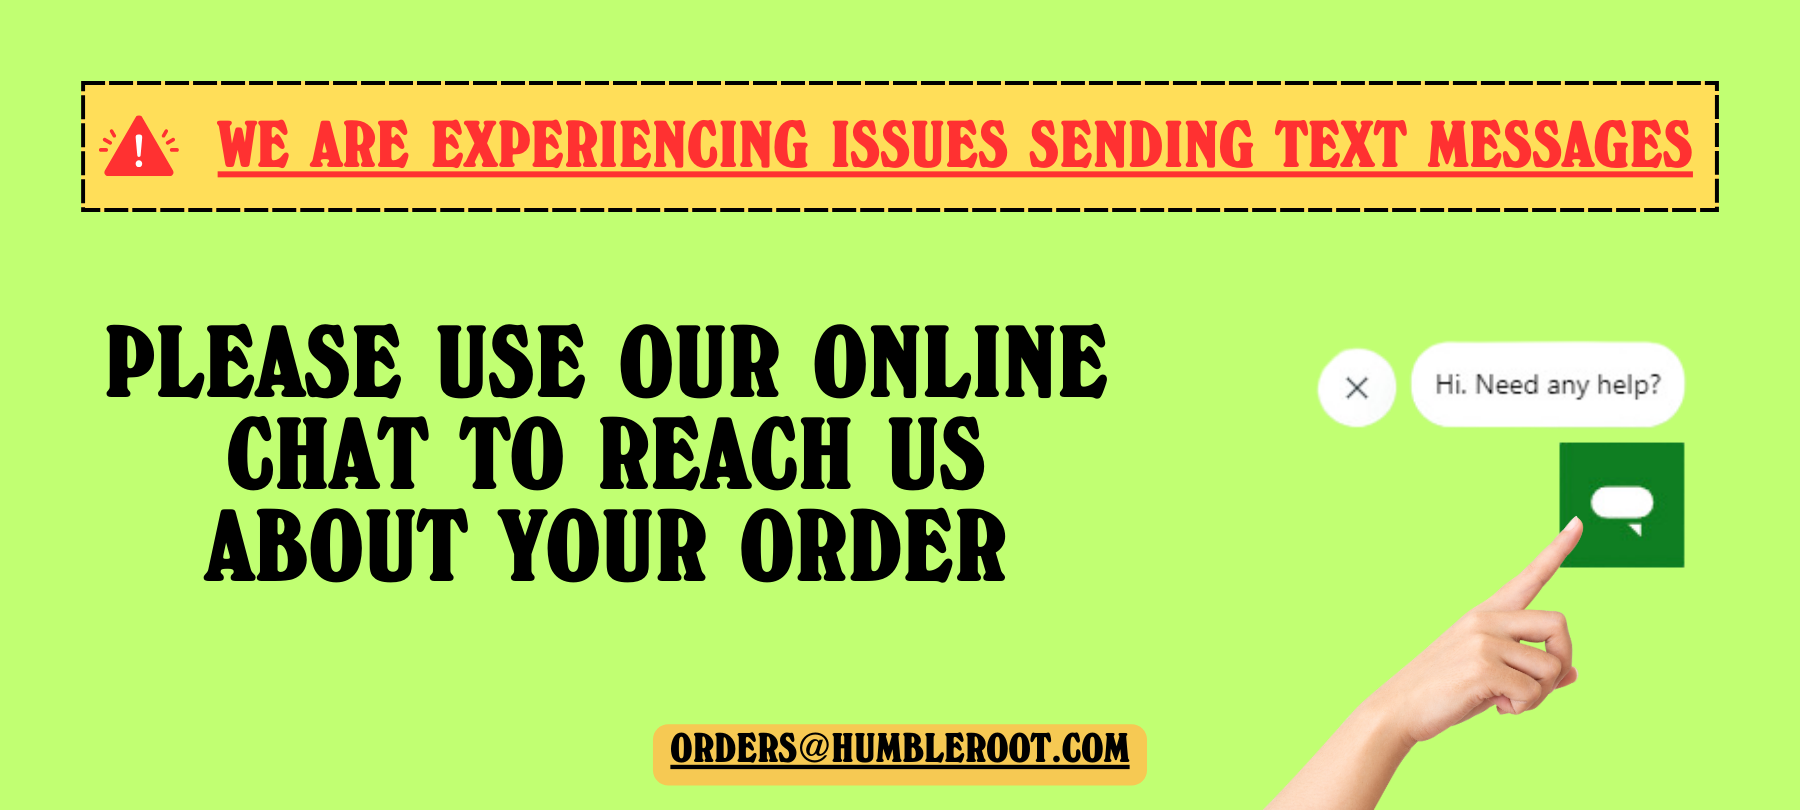 We are using online chat as our primary communication. Please contact us at orders@humbleroot.com